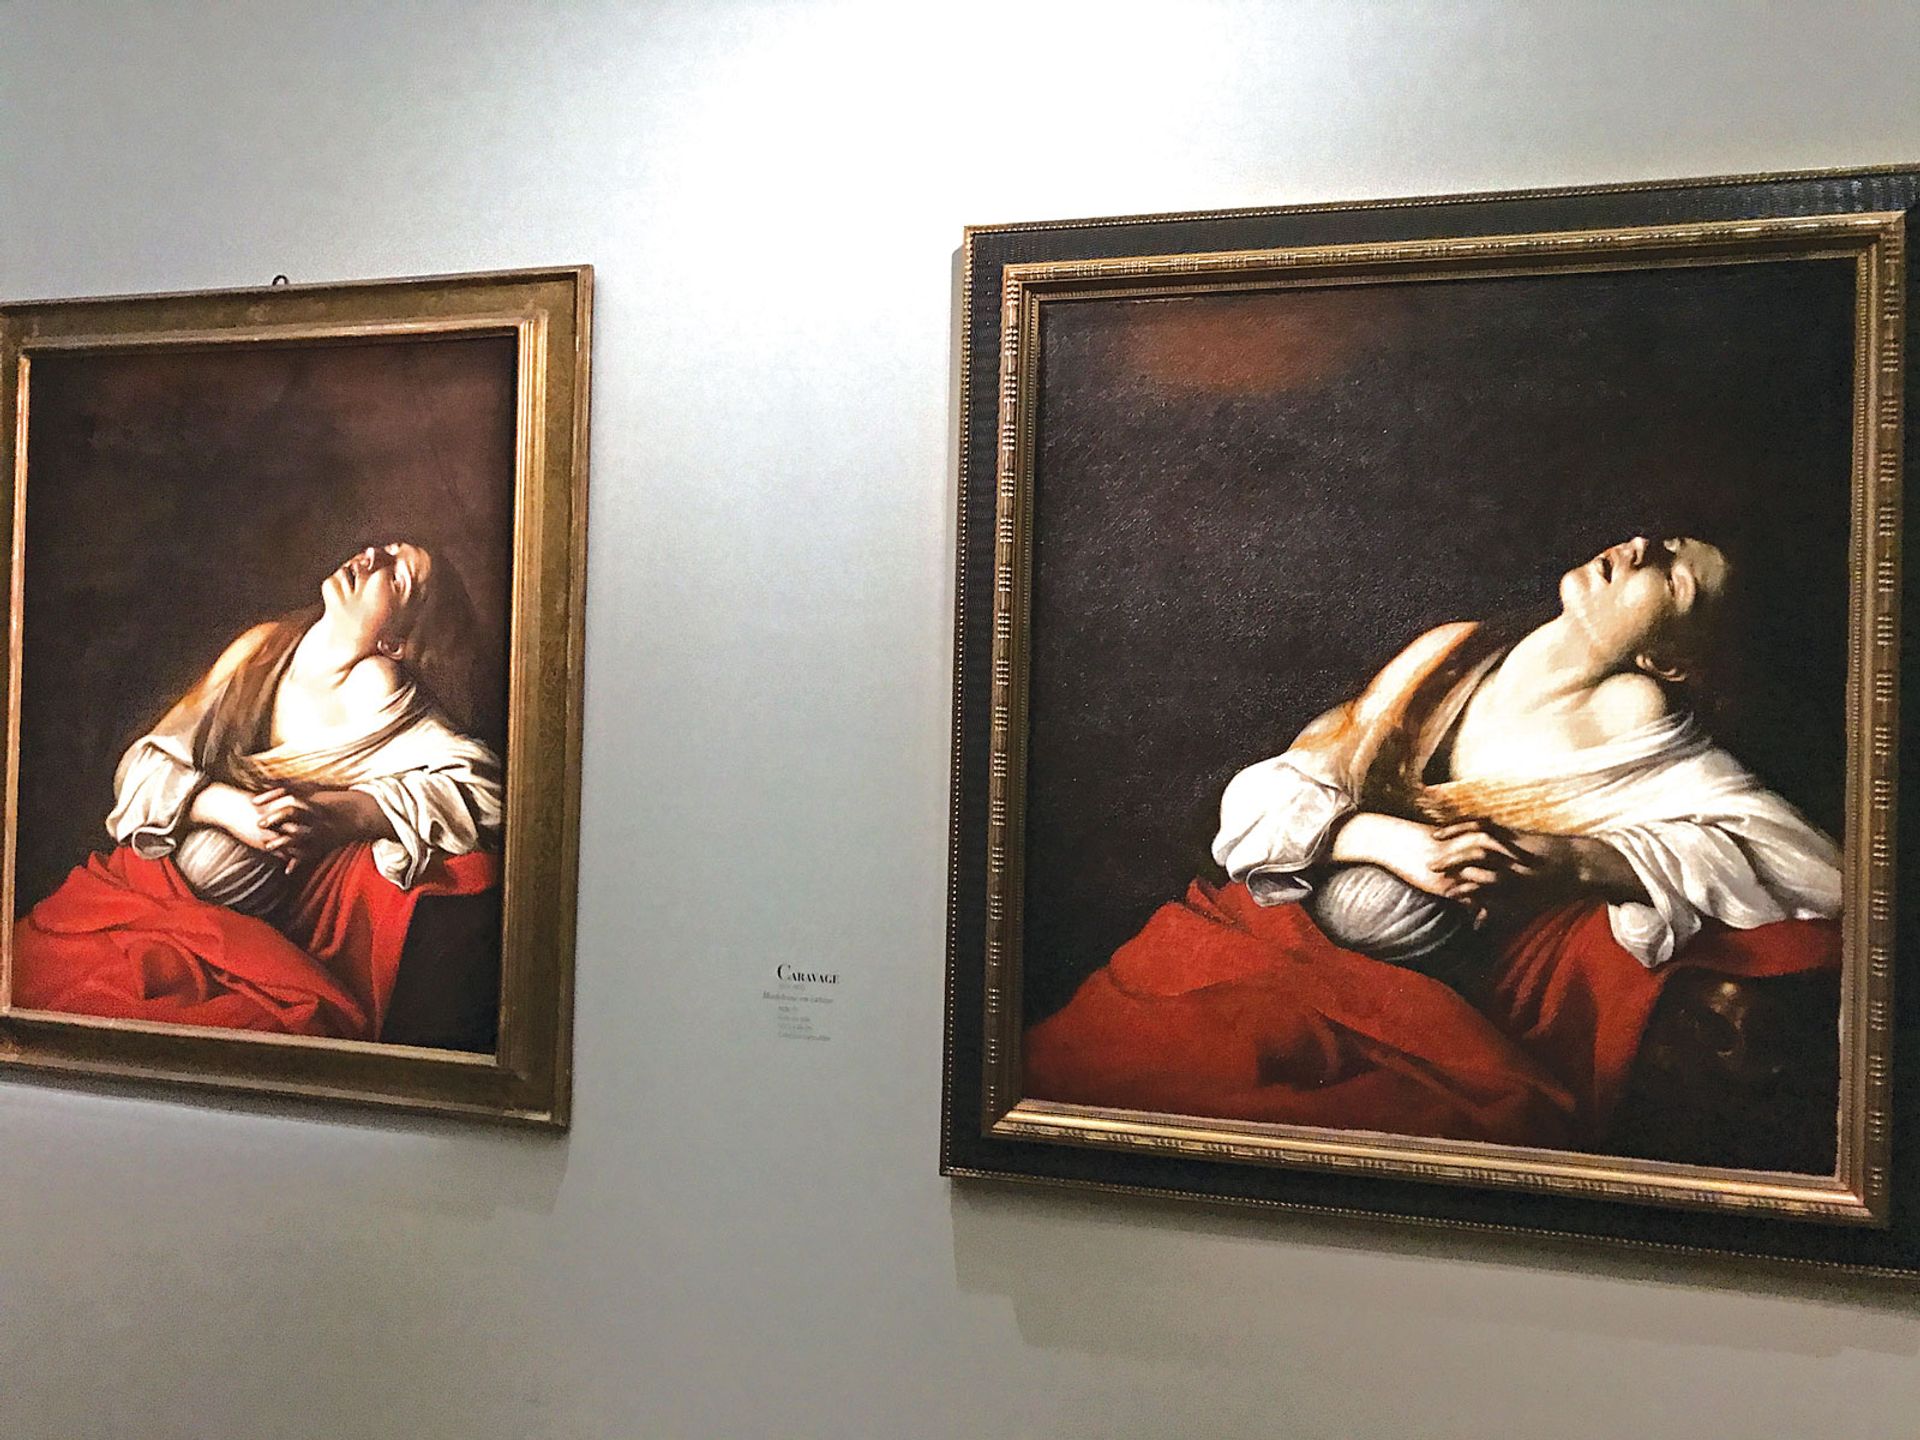 Showing two versions of a painting side by side is “one of the best things exhibitions can do to advance scholarship”, according to the Italian Baroque expert Richard Spear Gareth Harris